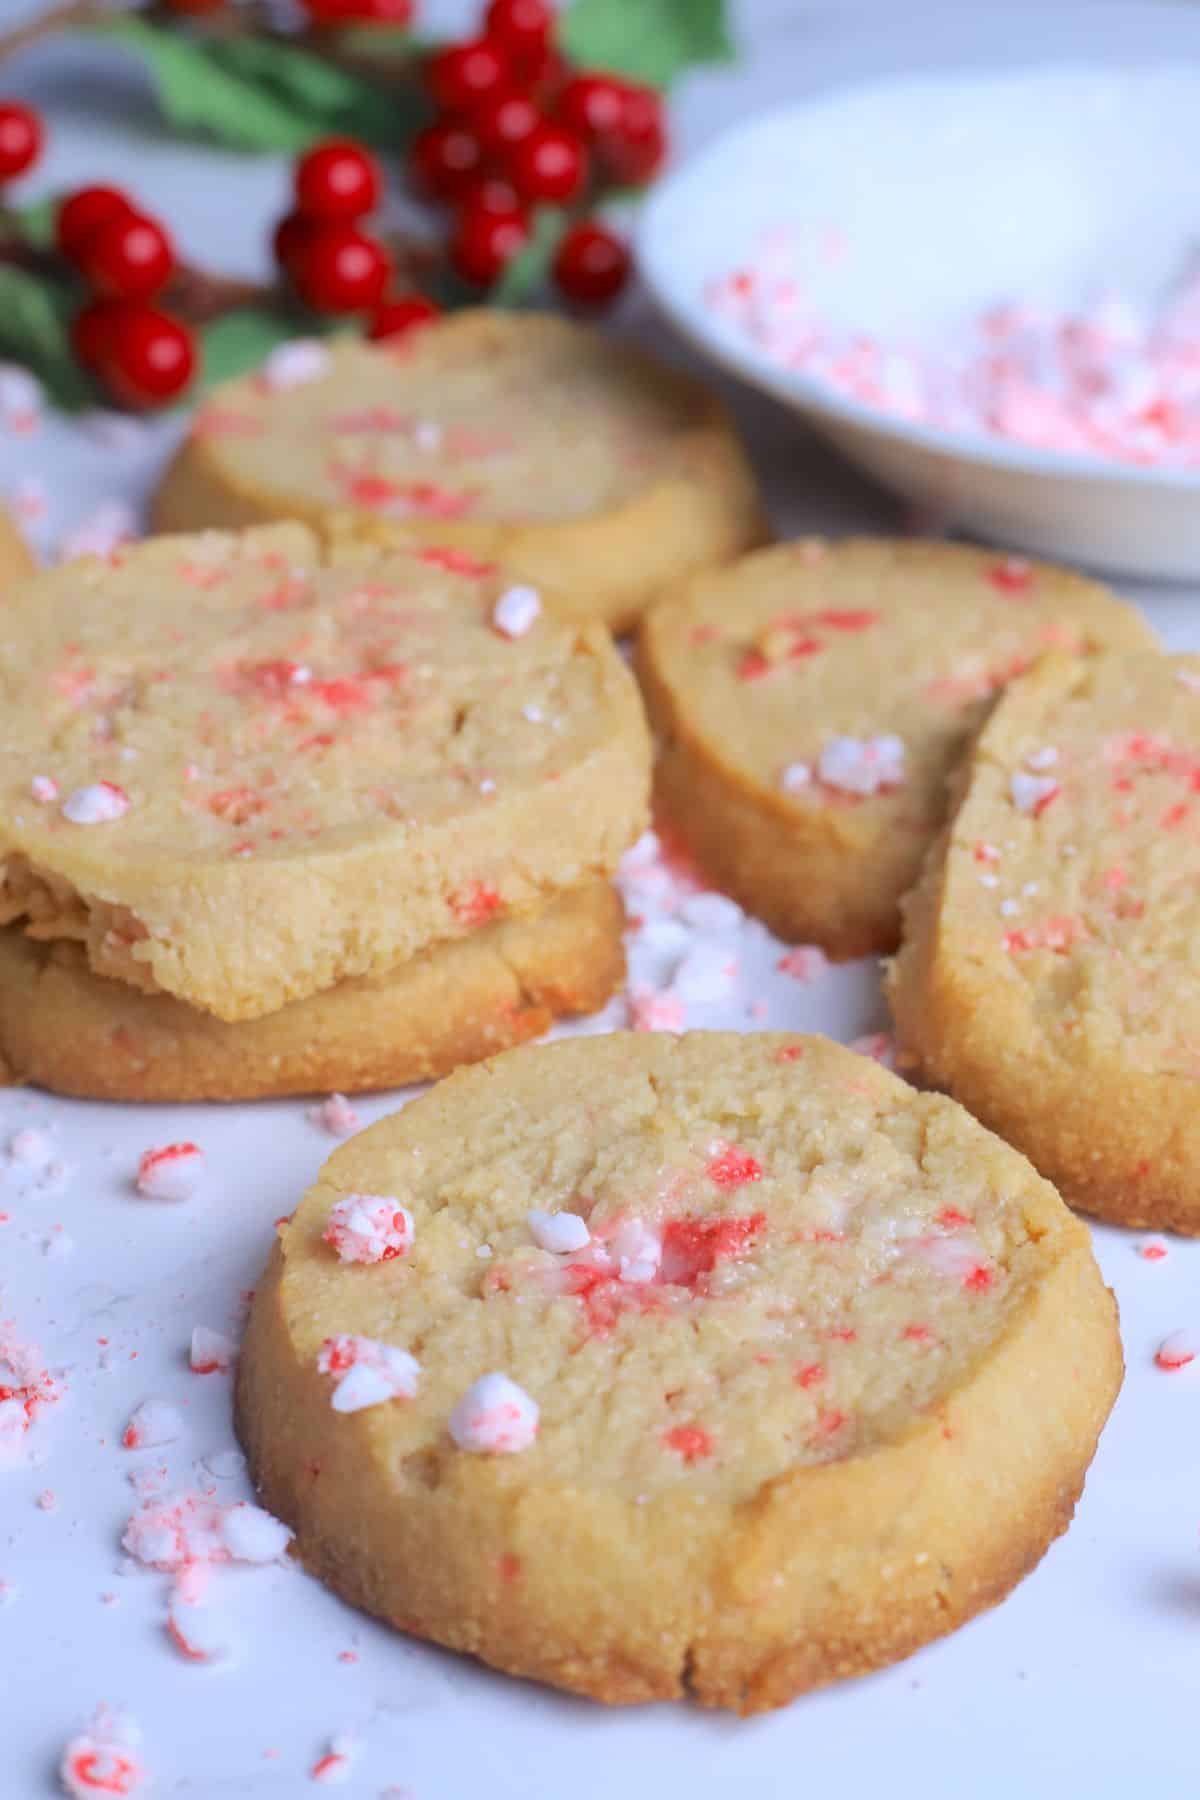 Sugar free peppermint shortbread cookies topped with crushed candy canes on a white plate next to a bowl of crushed candy canes.